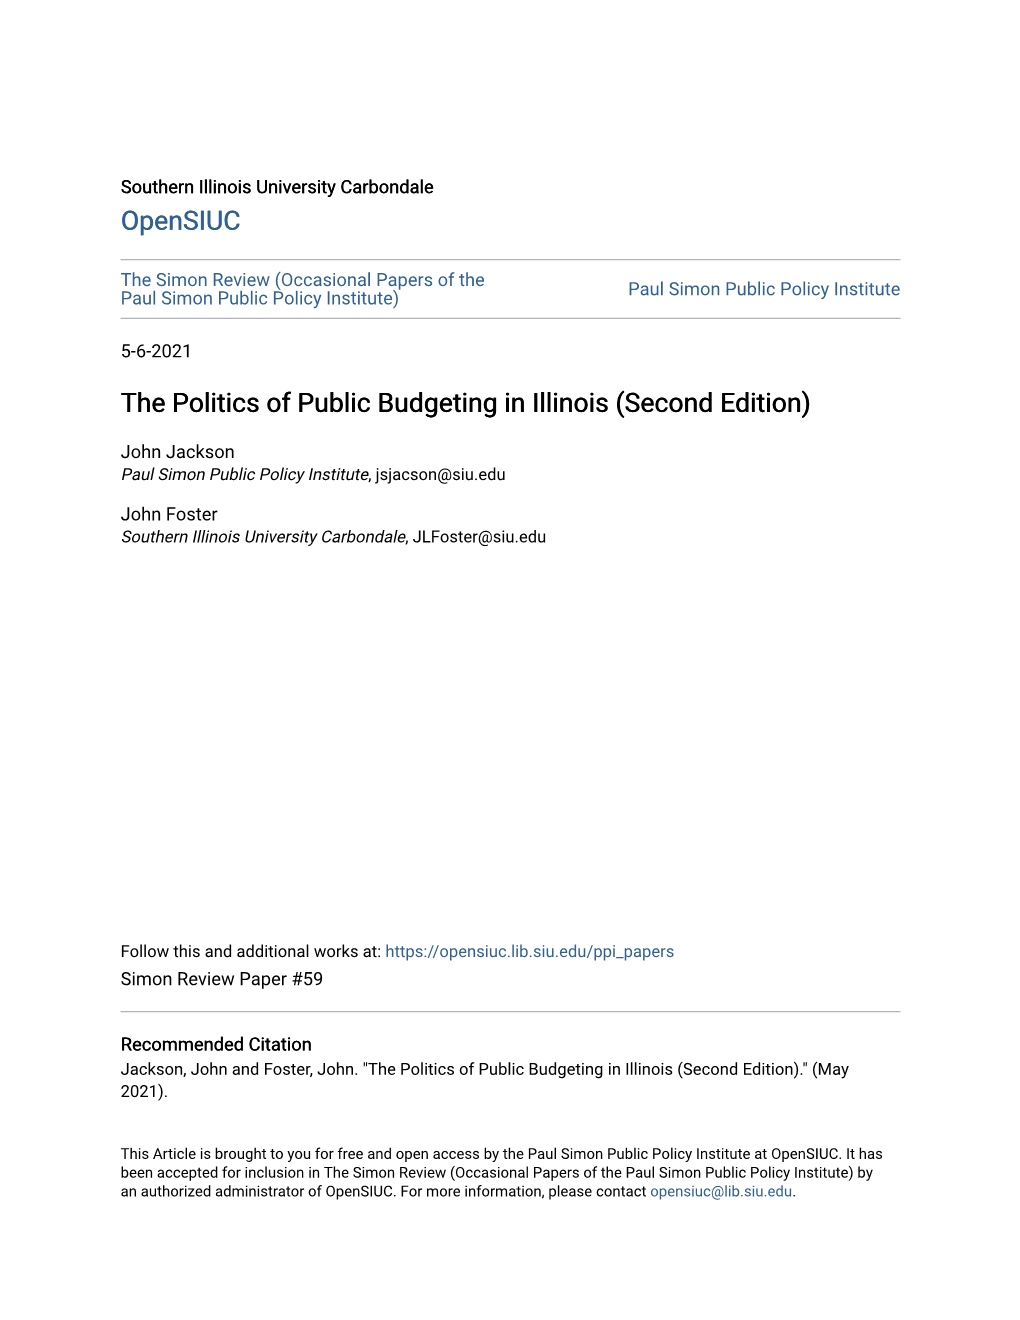 The Politics of Public Budgeting in Illinois (Second Edition)